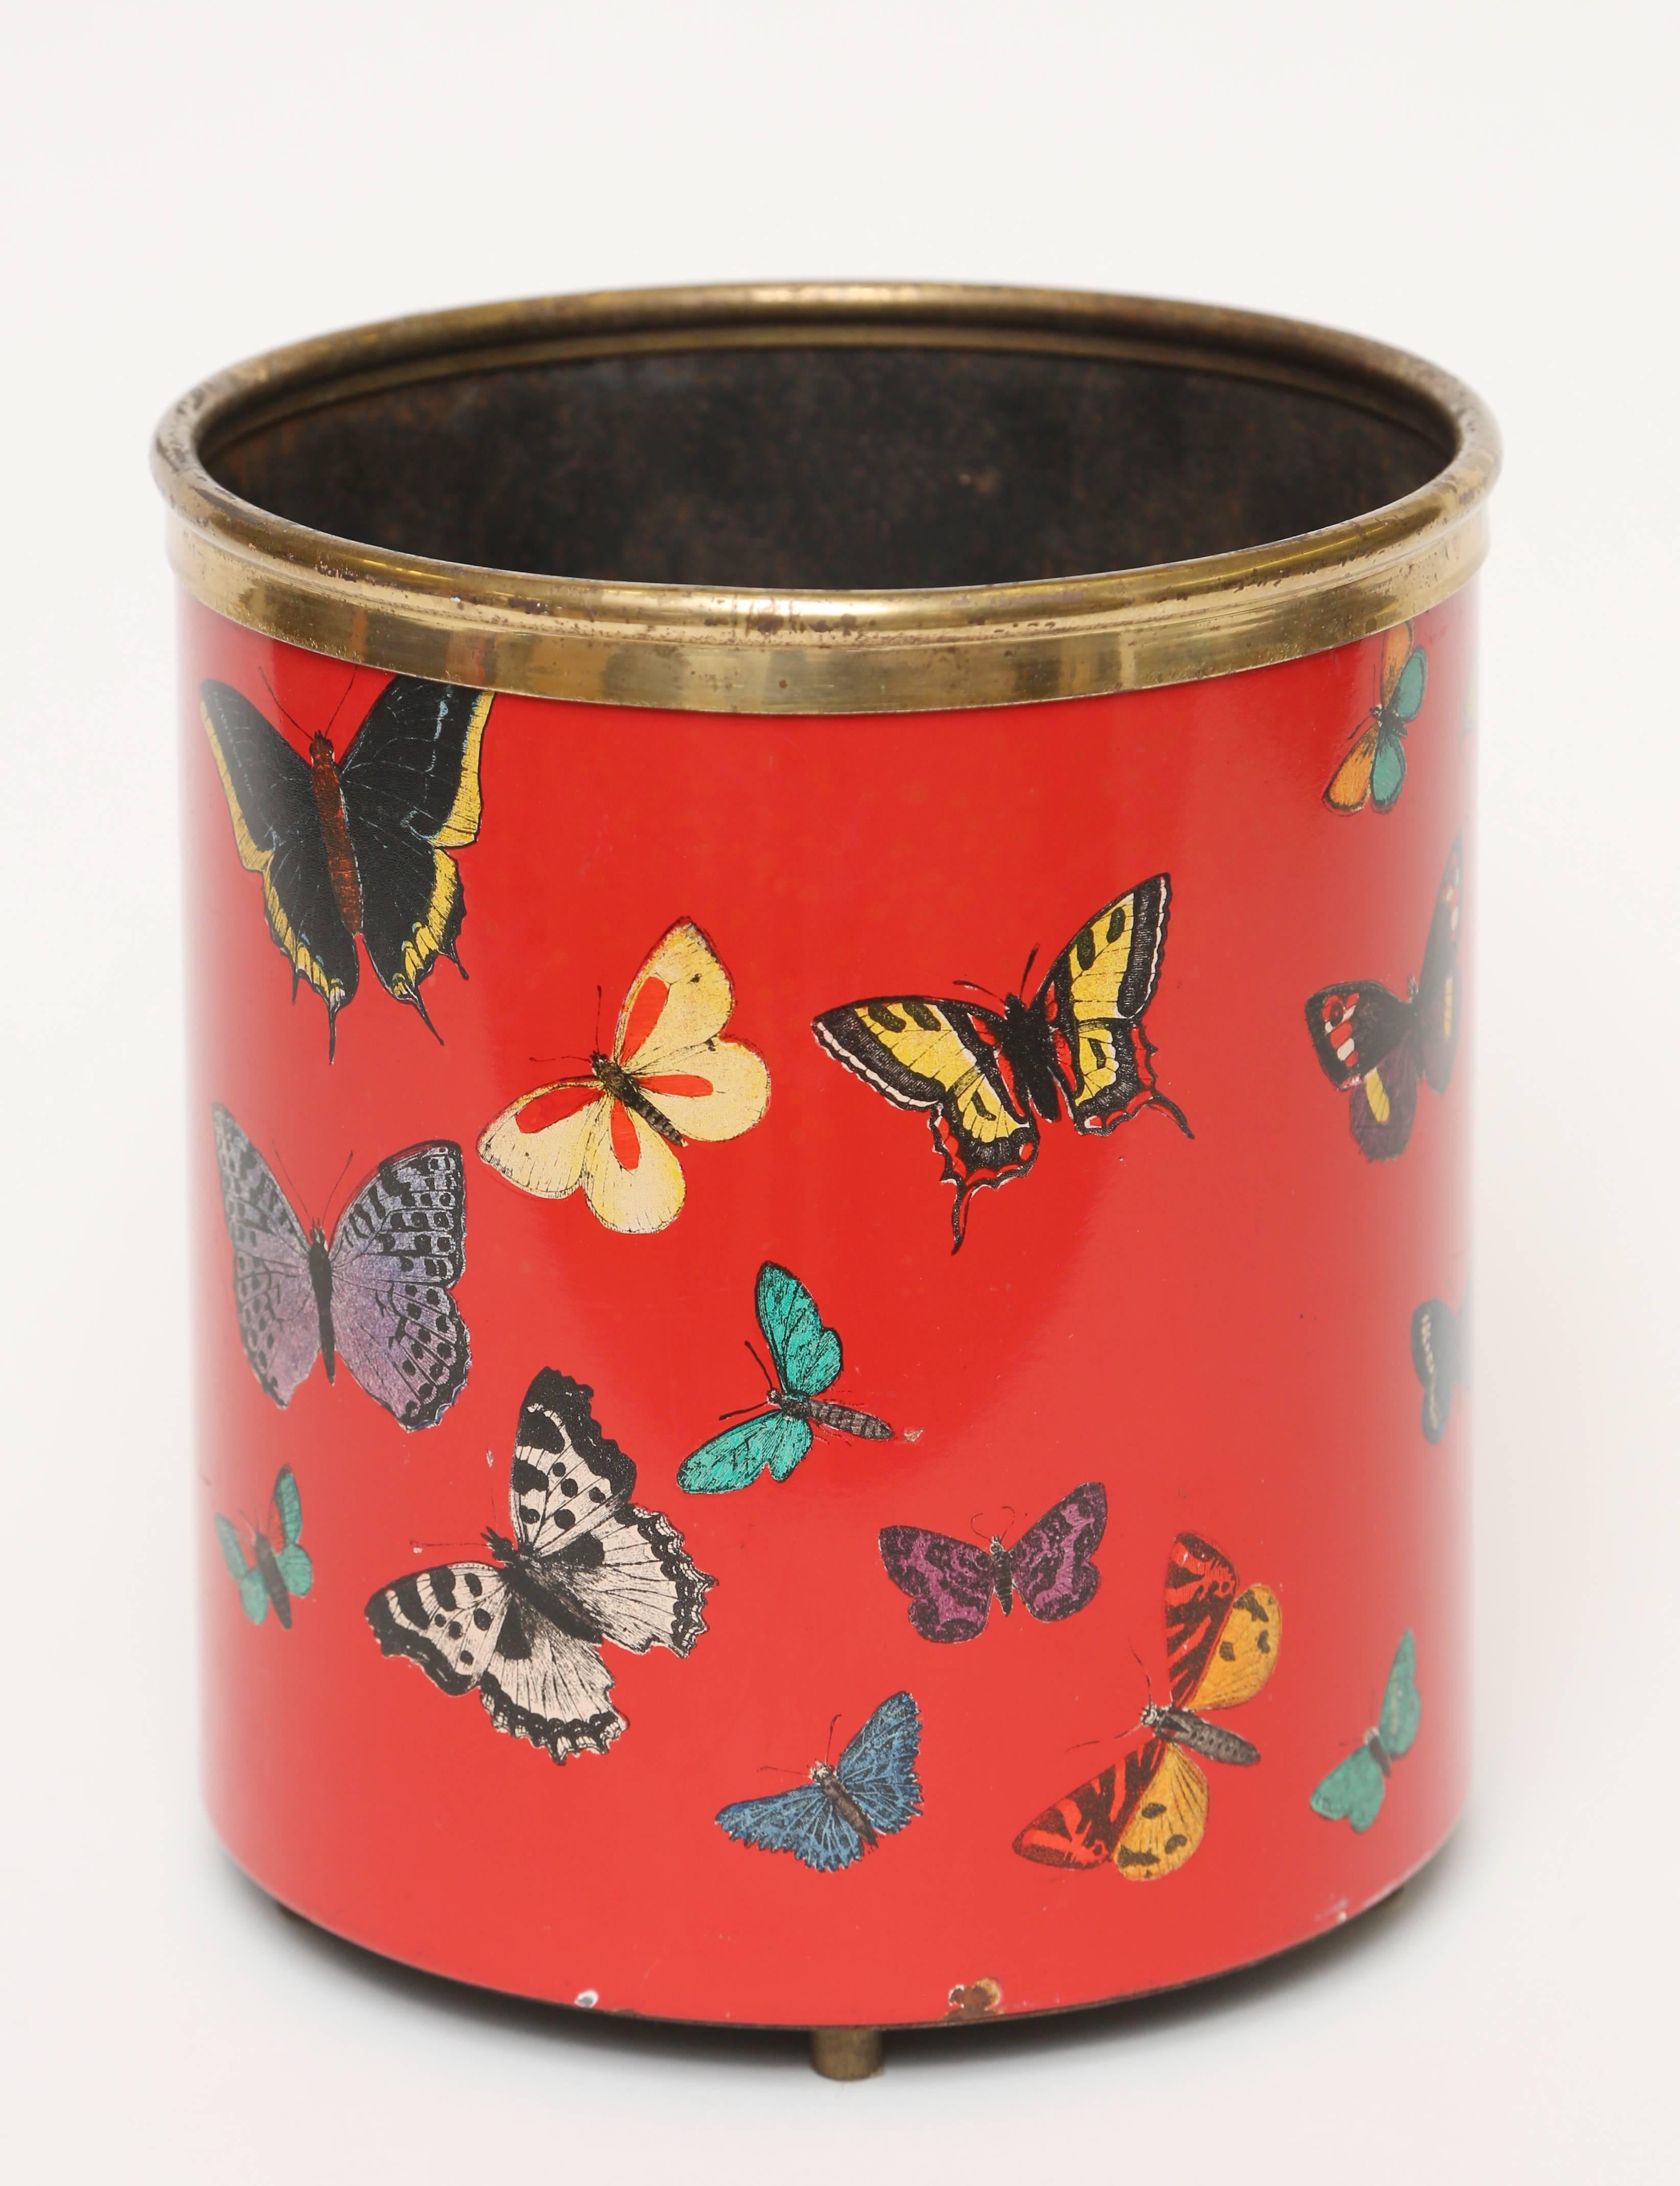 The most sought after Waste Can design from Piero Fornasetti.
A vintage 1950s version in a diminutive size.
This size was never reissued.